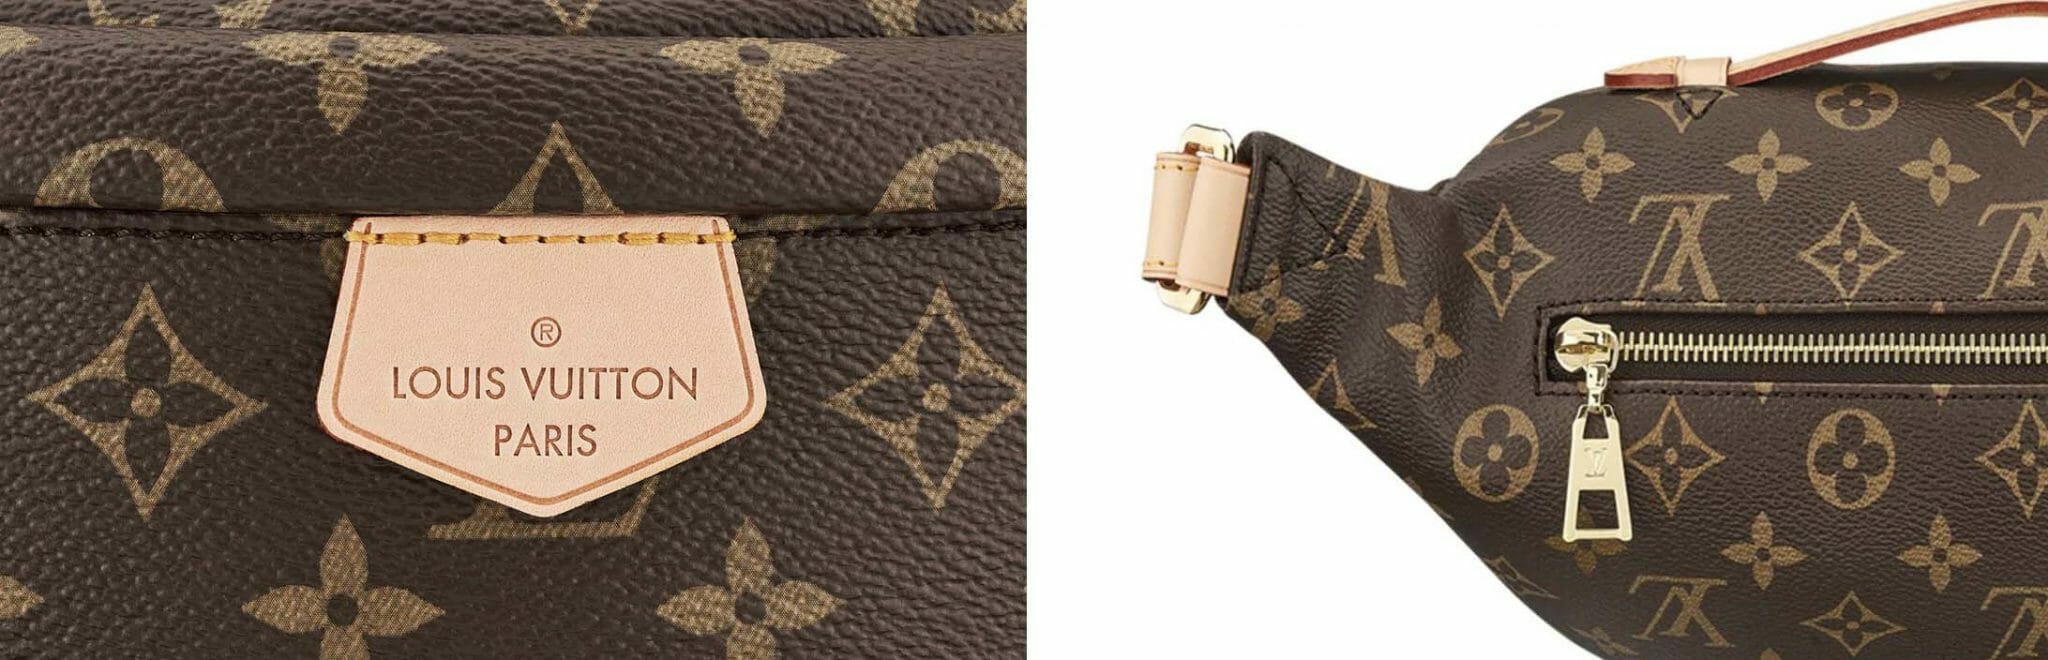 How to Style the Louis Vuitton Bumbag + Full Range Details and Prices